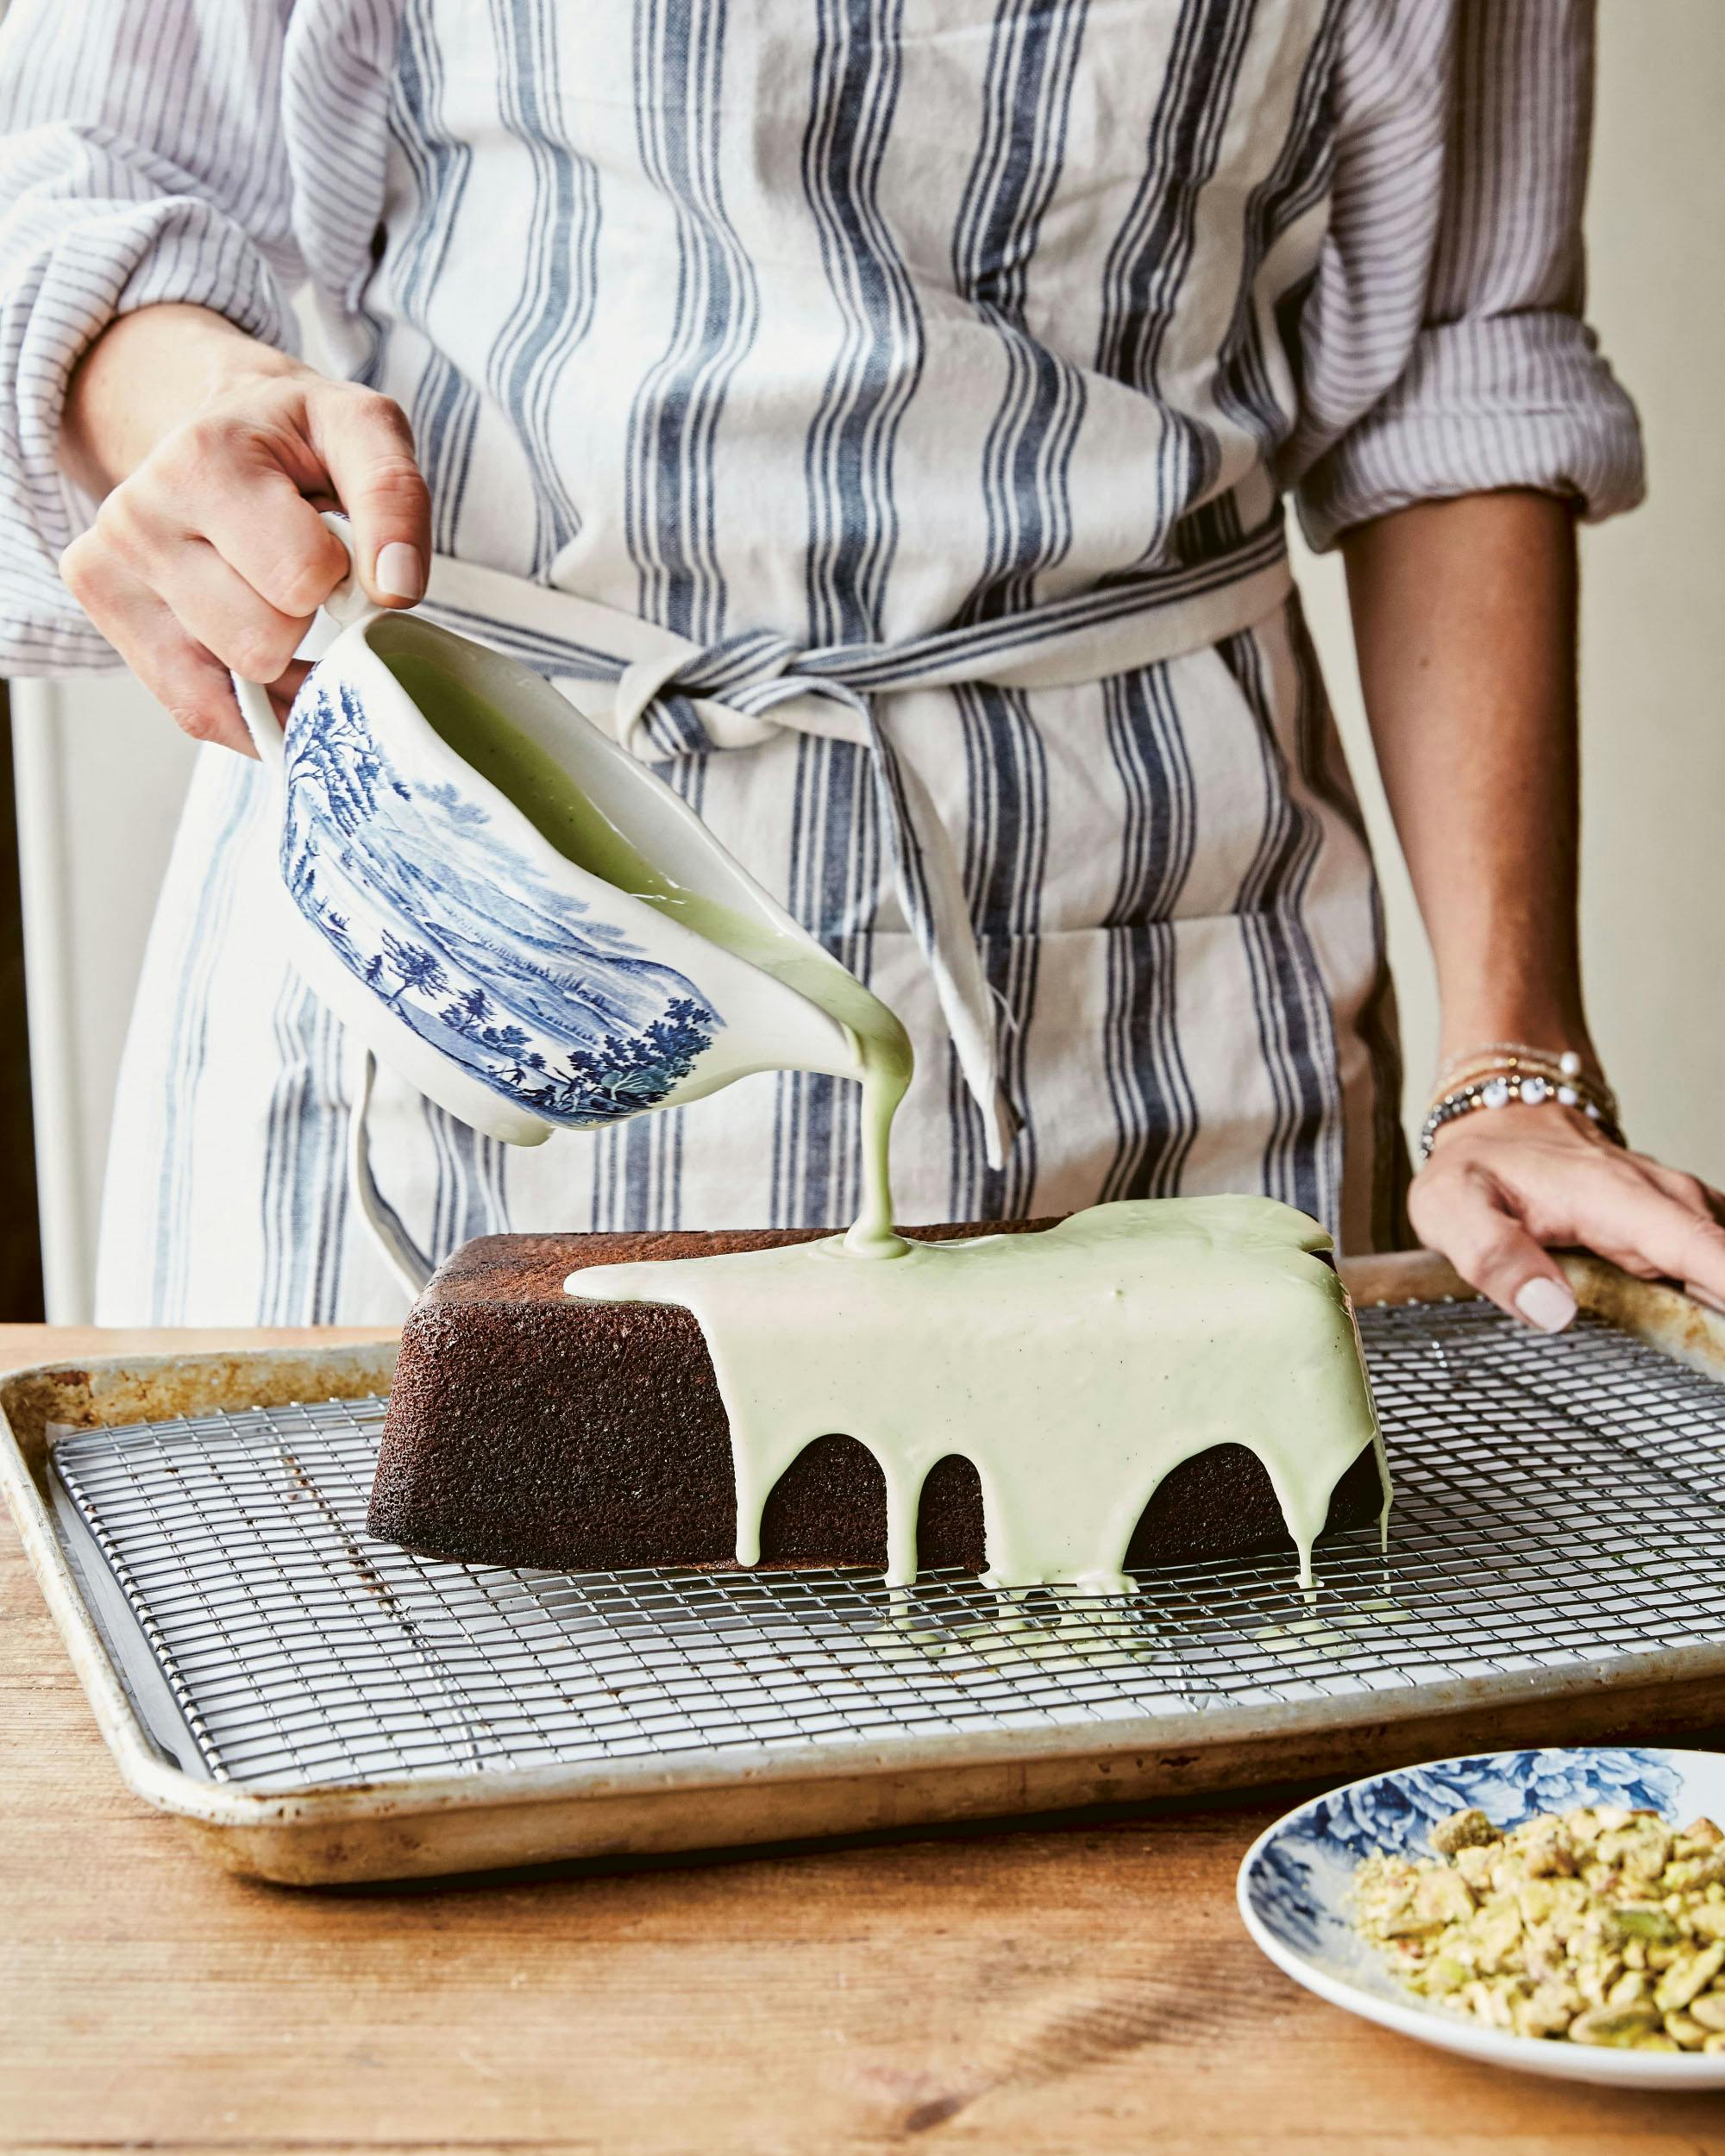 Pouring icing on Pistachio Loaf Cake from maman the cookbook